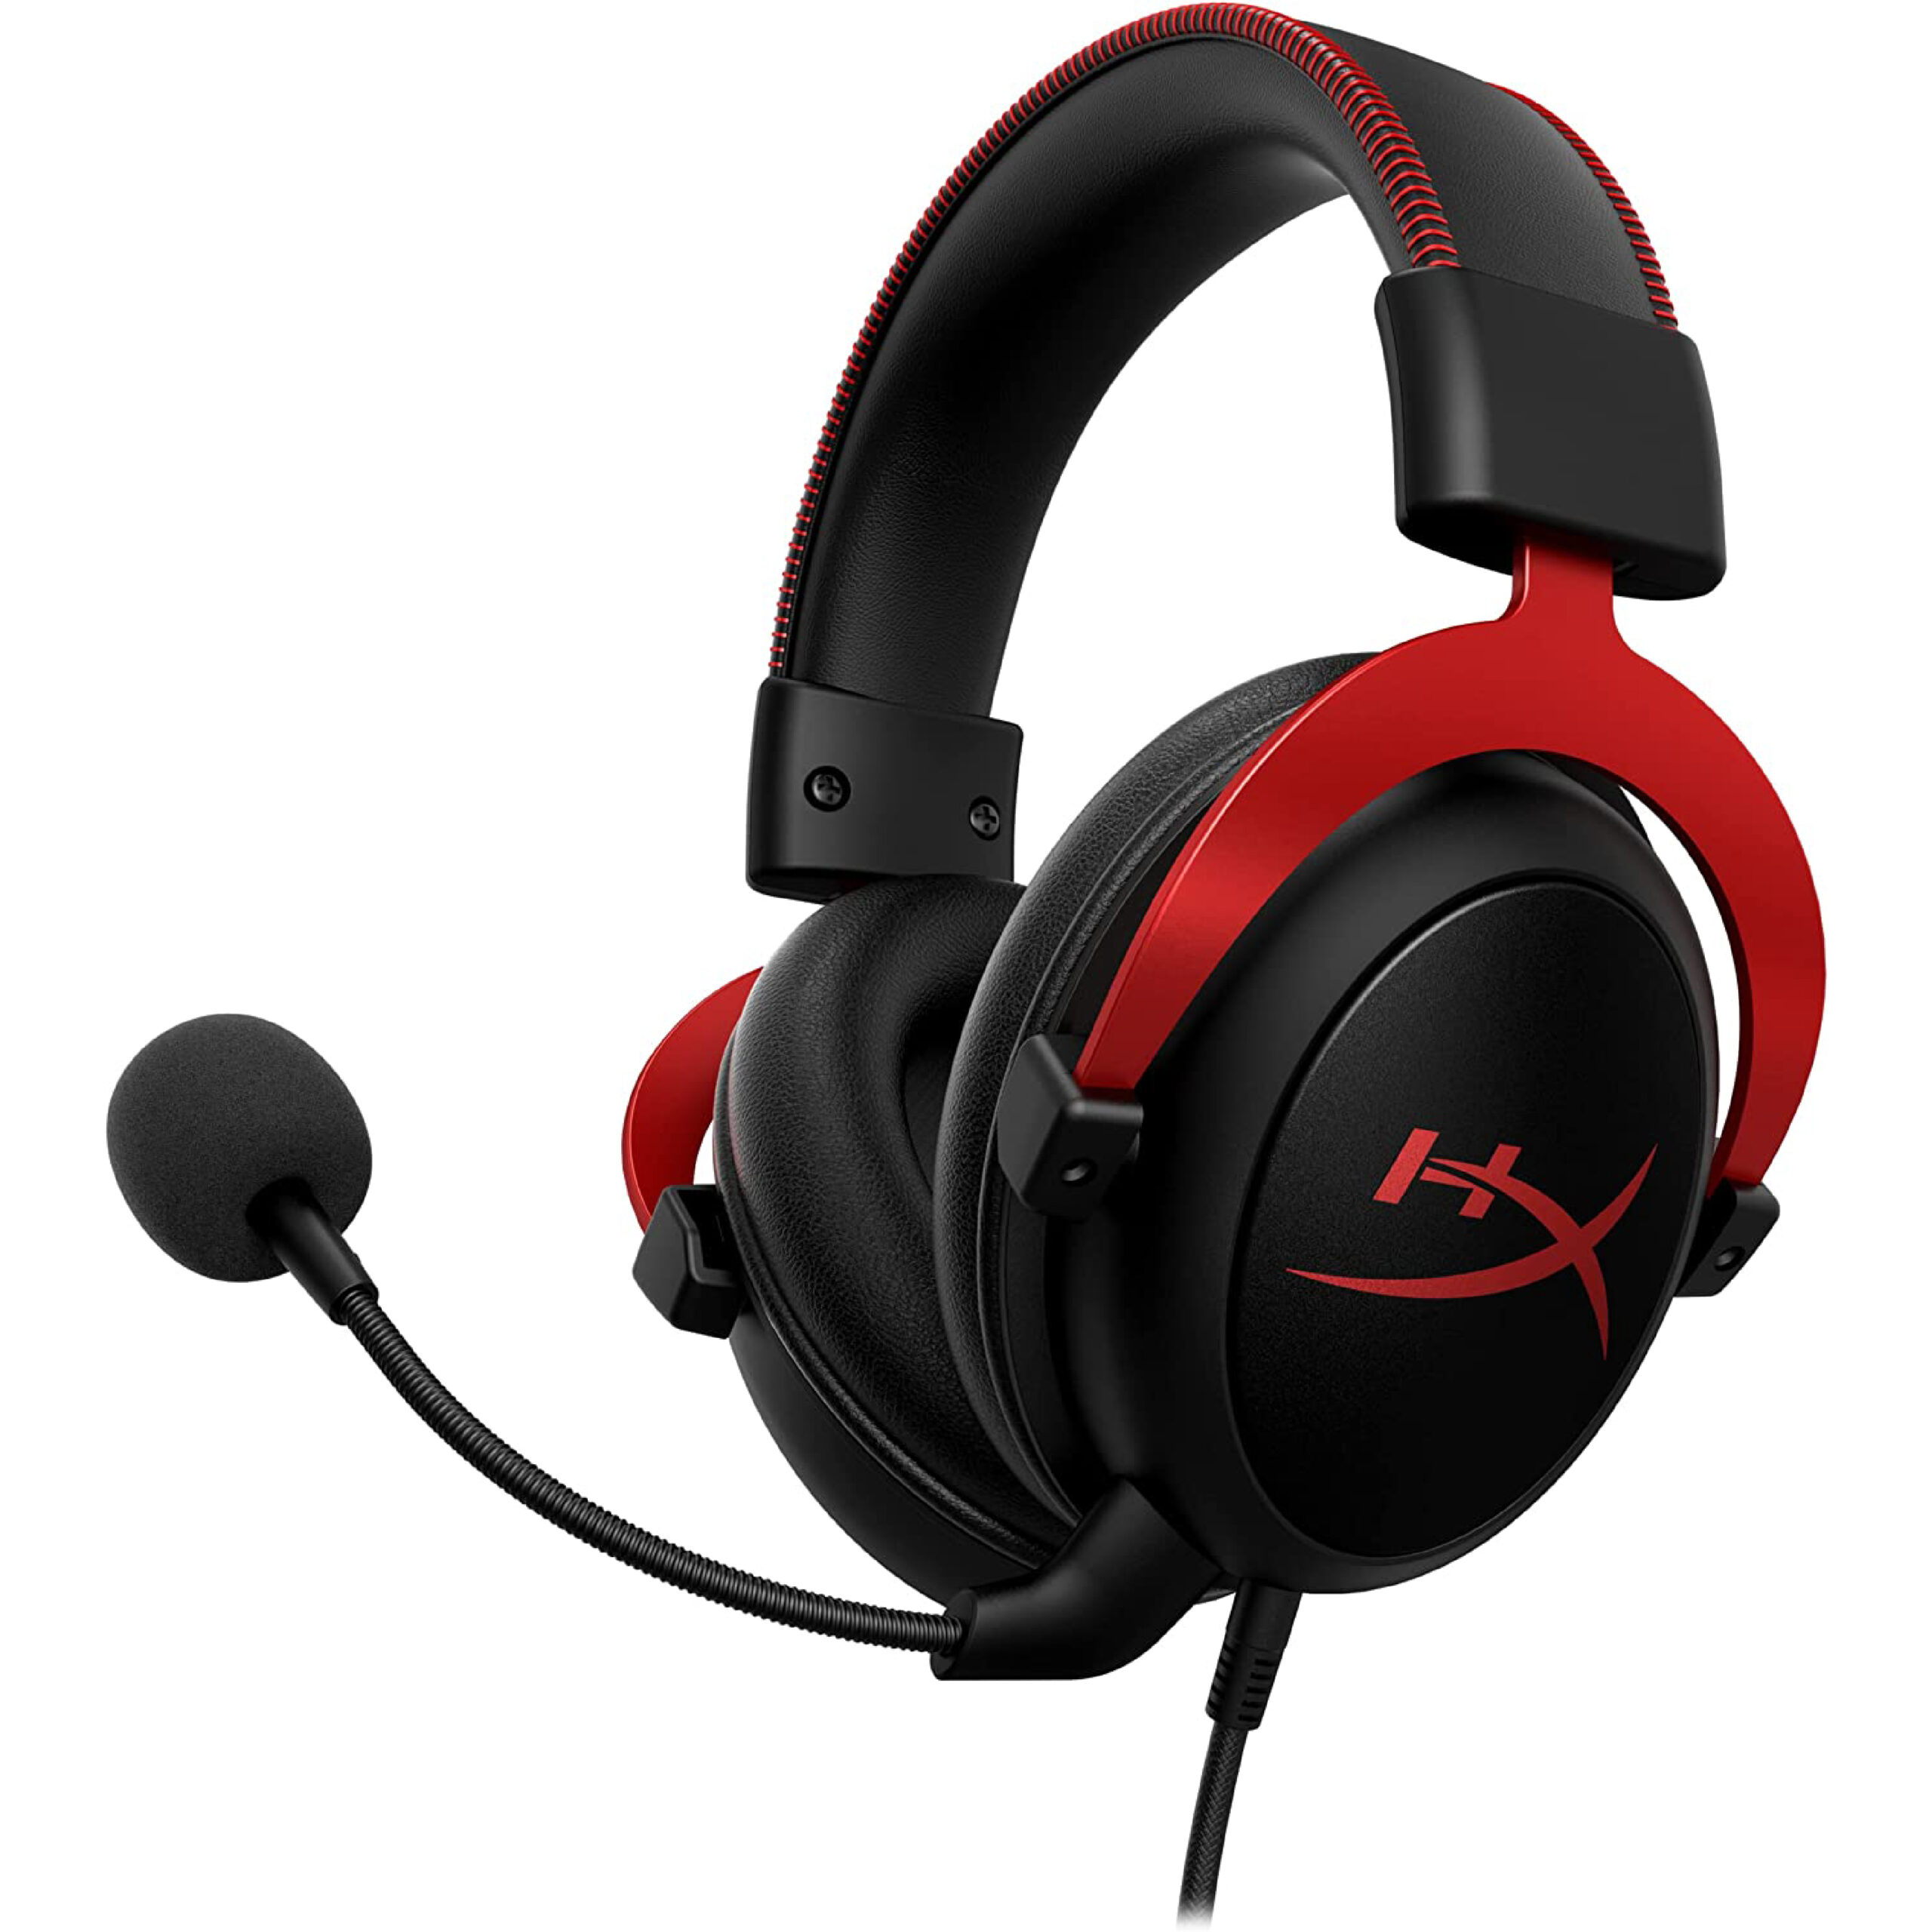 HyperX Cloud 2 gaming headset. Patrick Will's headset for his podcast WillCast.